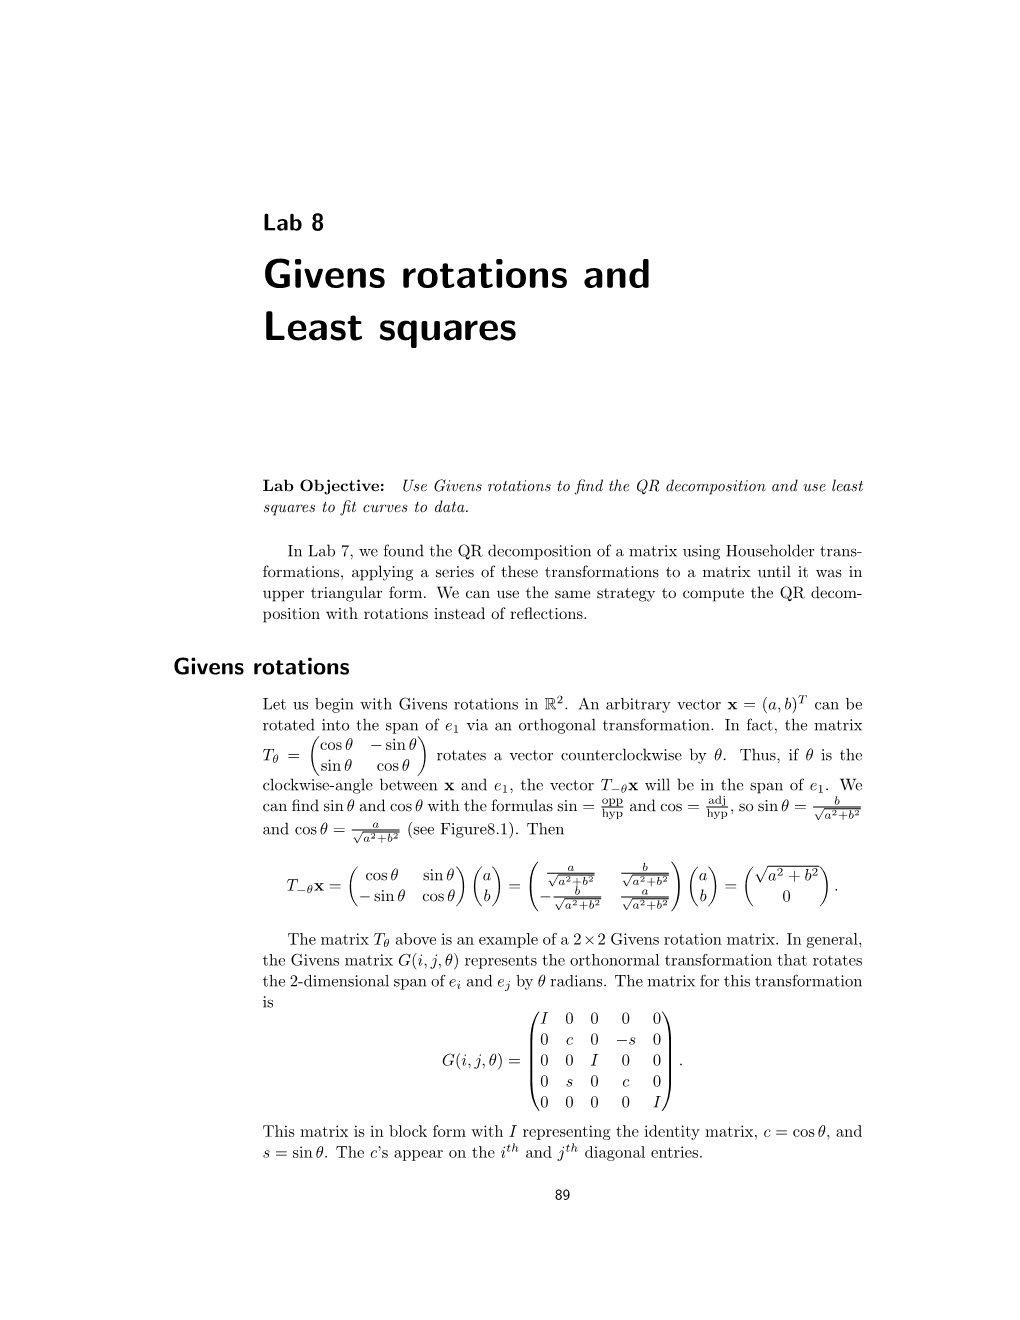 Givens Rotations and Least Squares